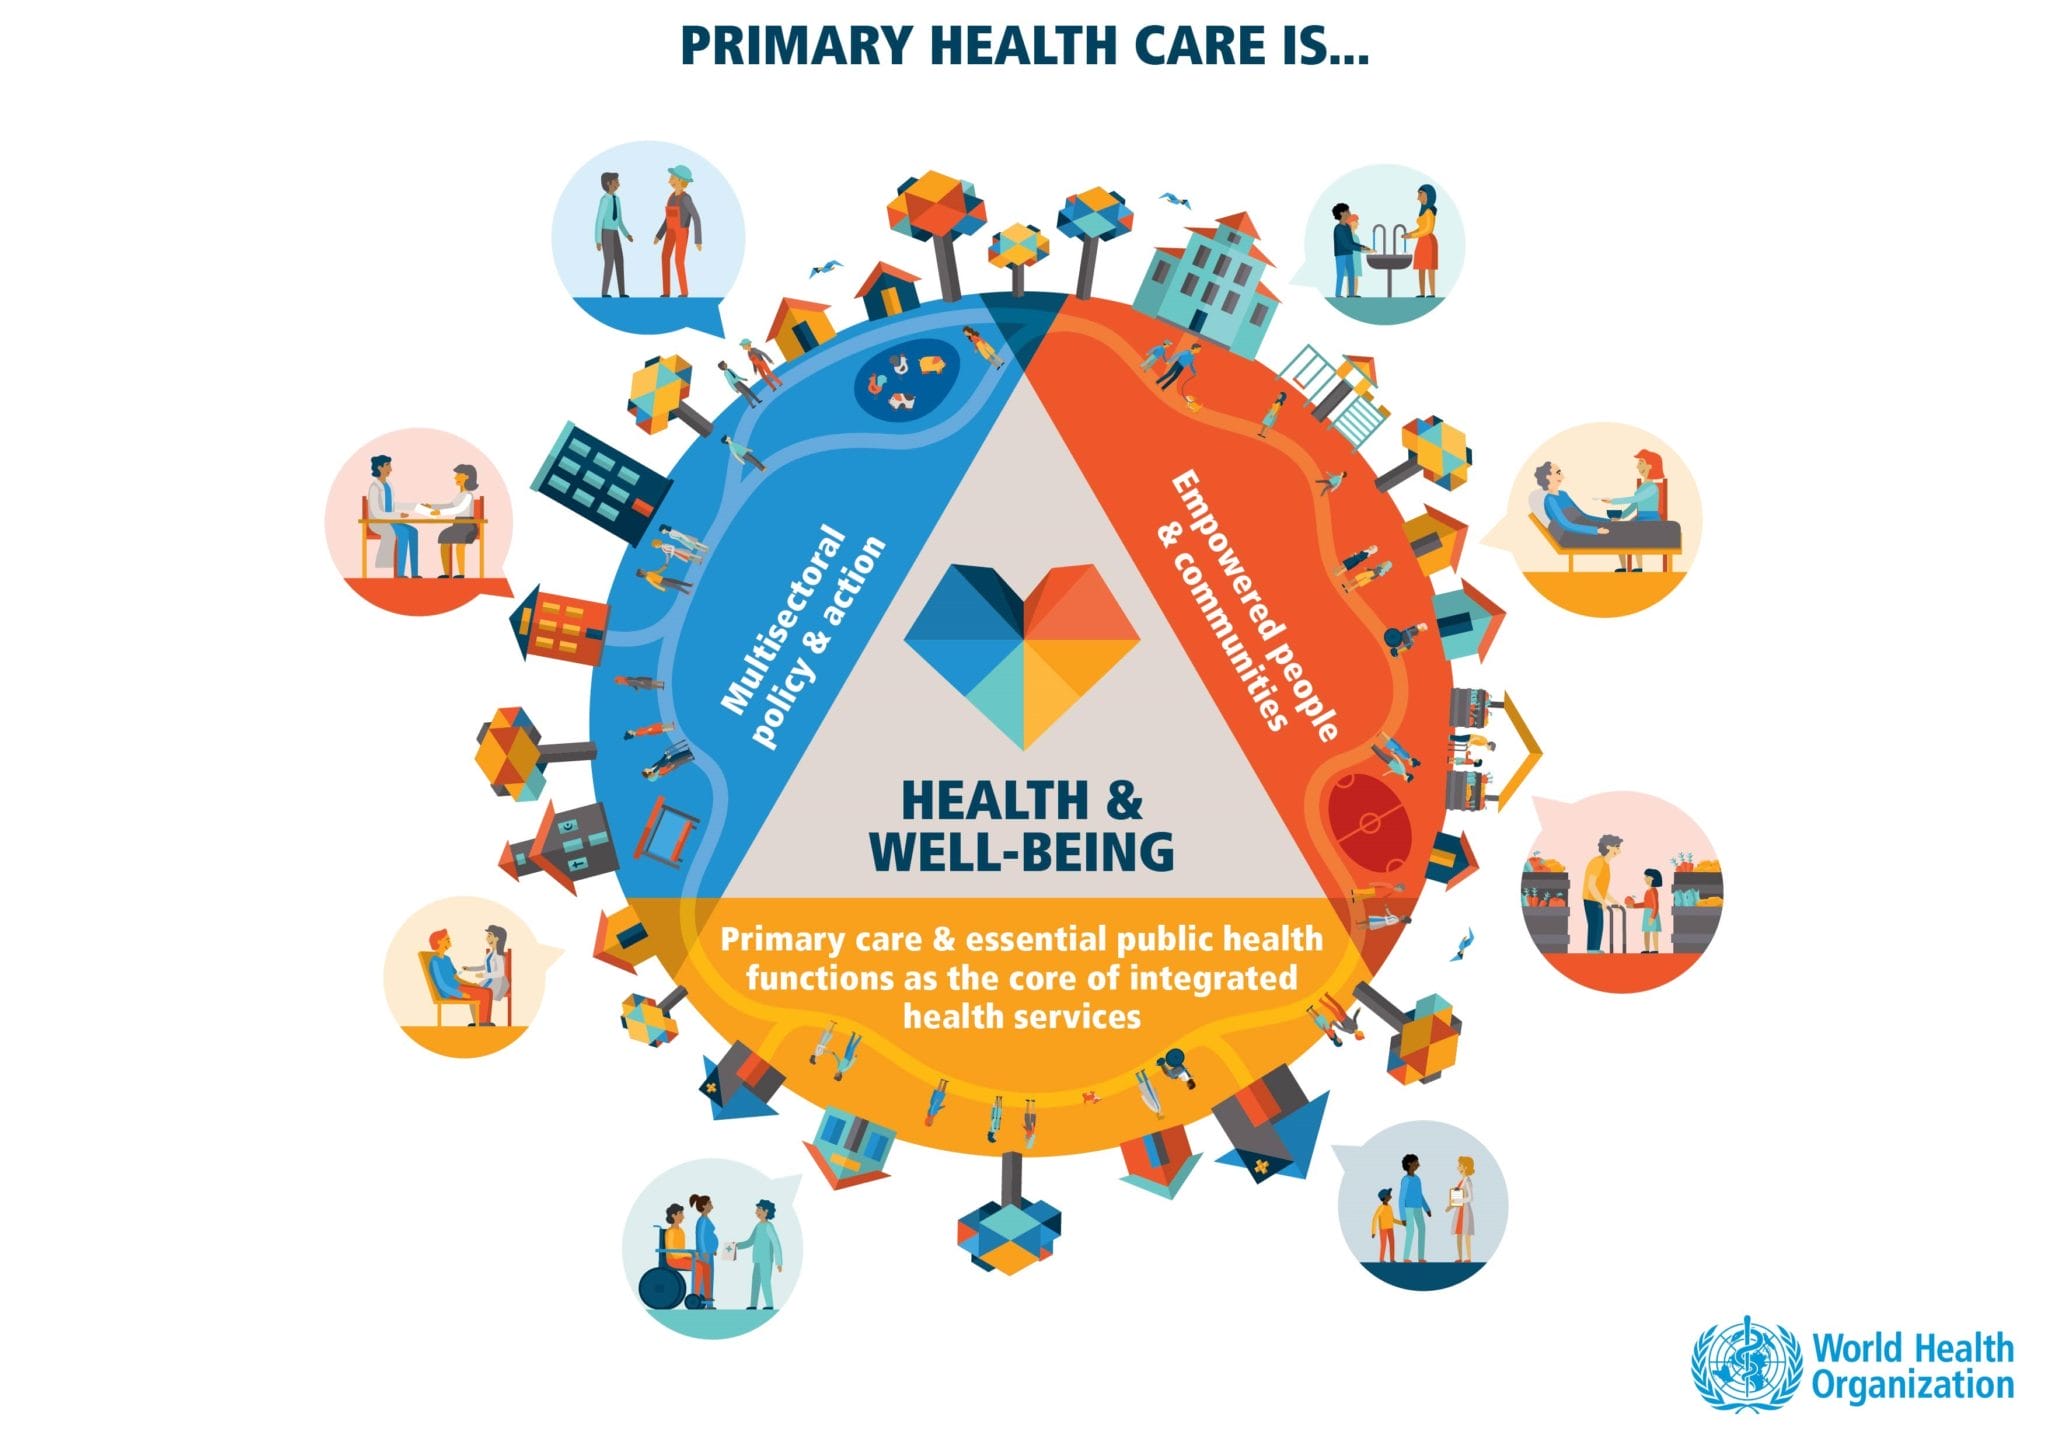 Illustrative diagram by the world health organization showing components of primary health care around a circular infographic with central text on health and well-being.